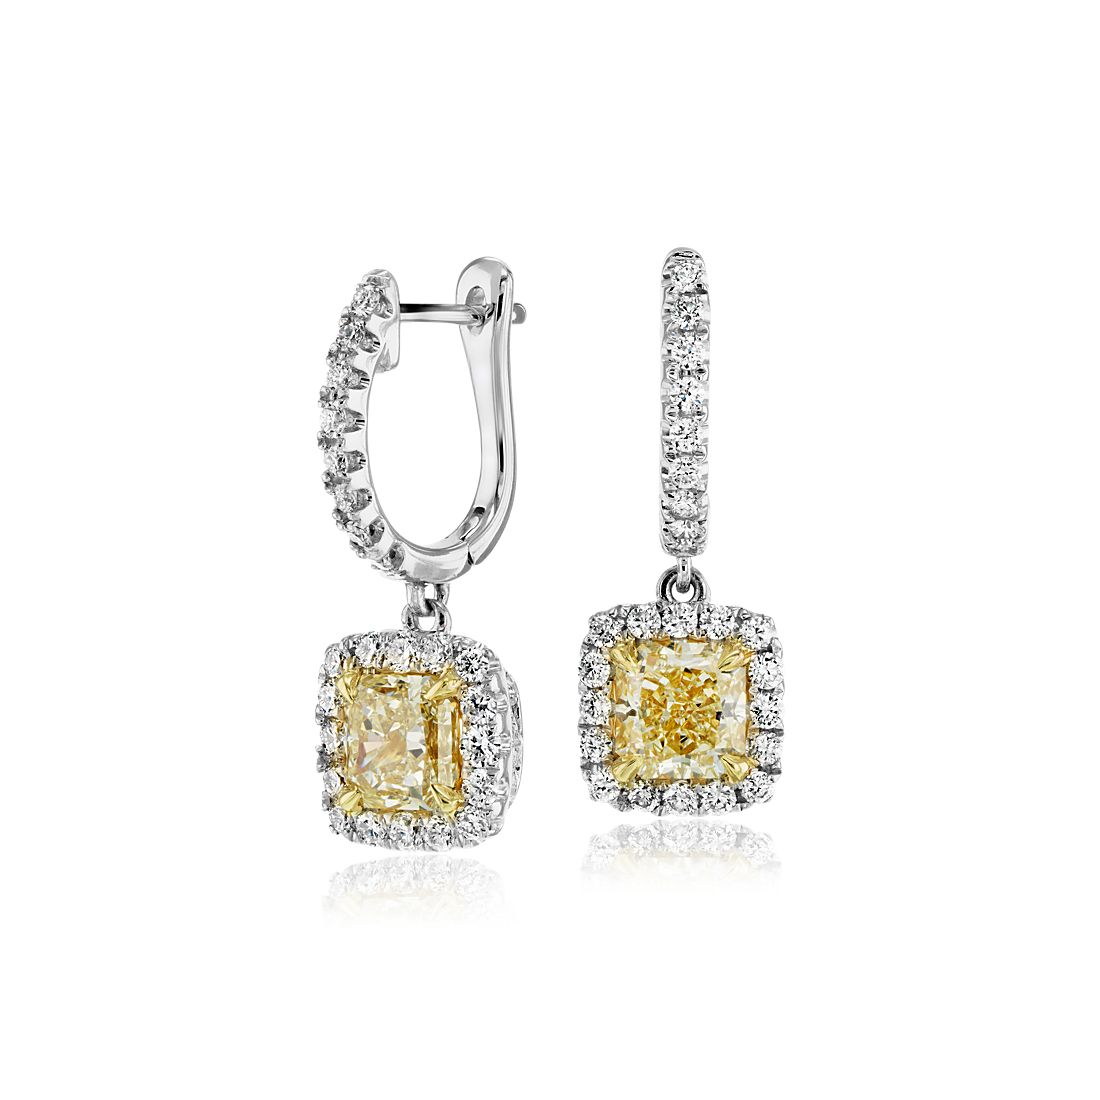 Yellow Diamond Drop Earrings with Halos in 18k White and Yellow Gold (0.72 ct. tw.)